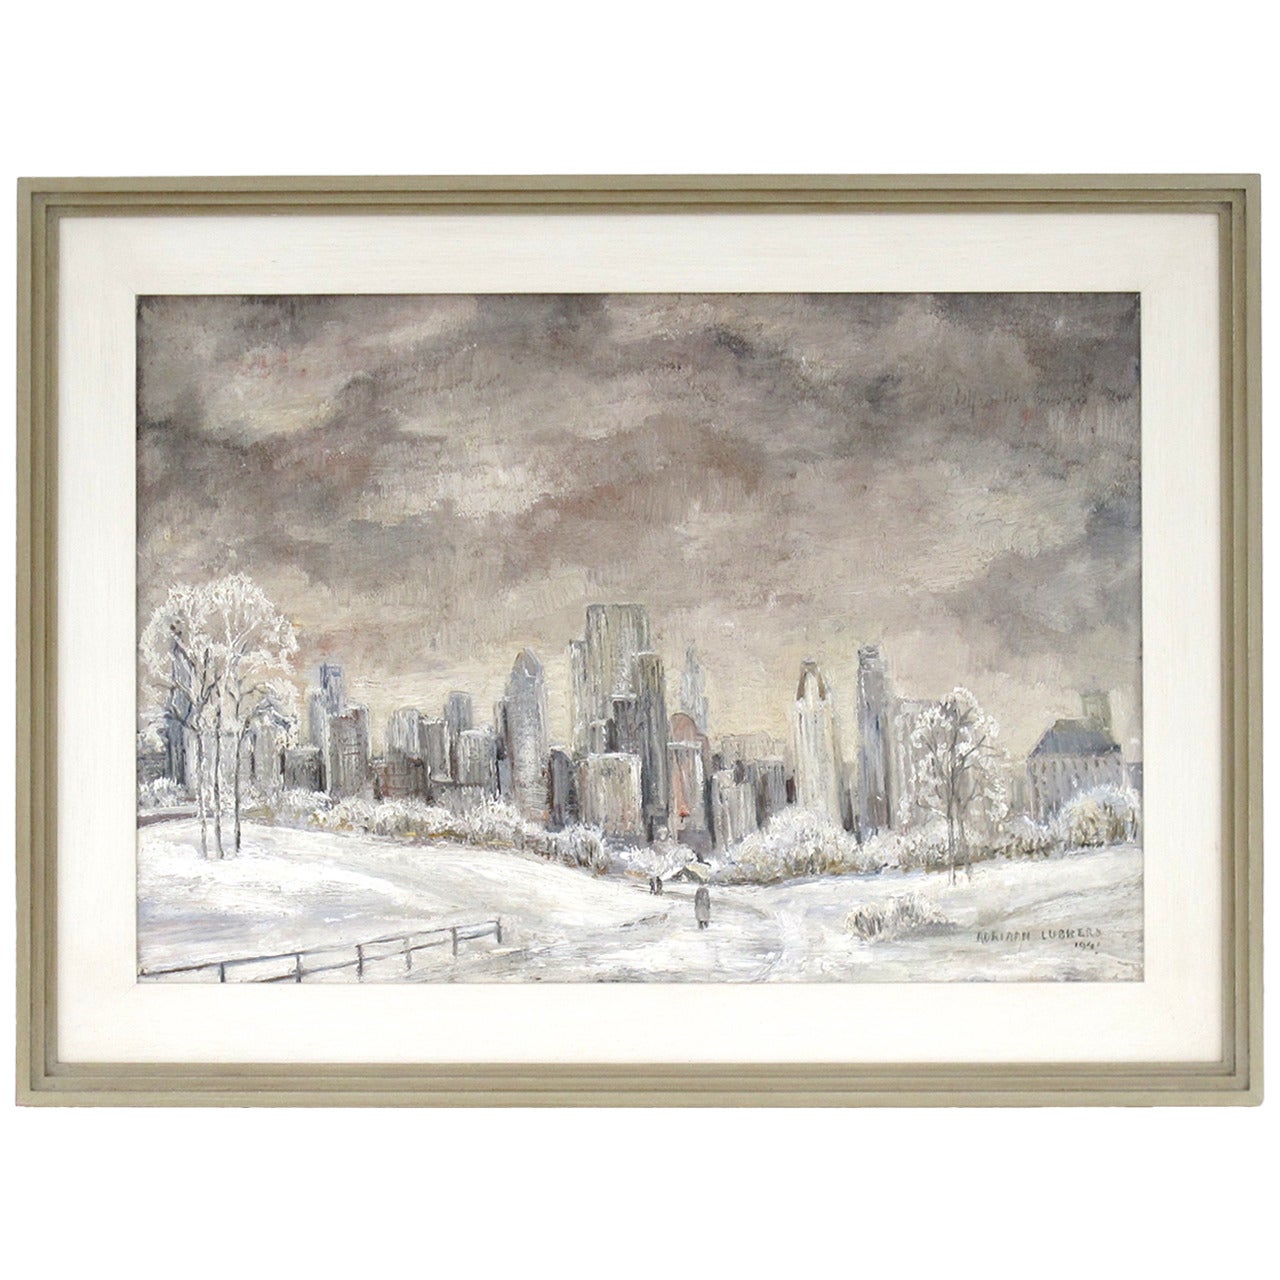 Adrian Lubbers "Winter in New York" Oil on Canvas, 1941 For Sale